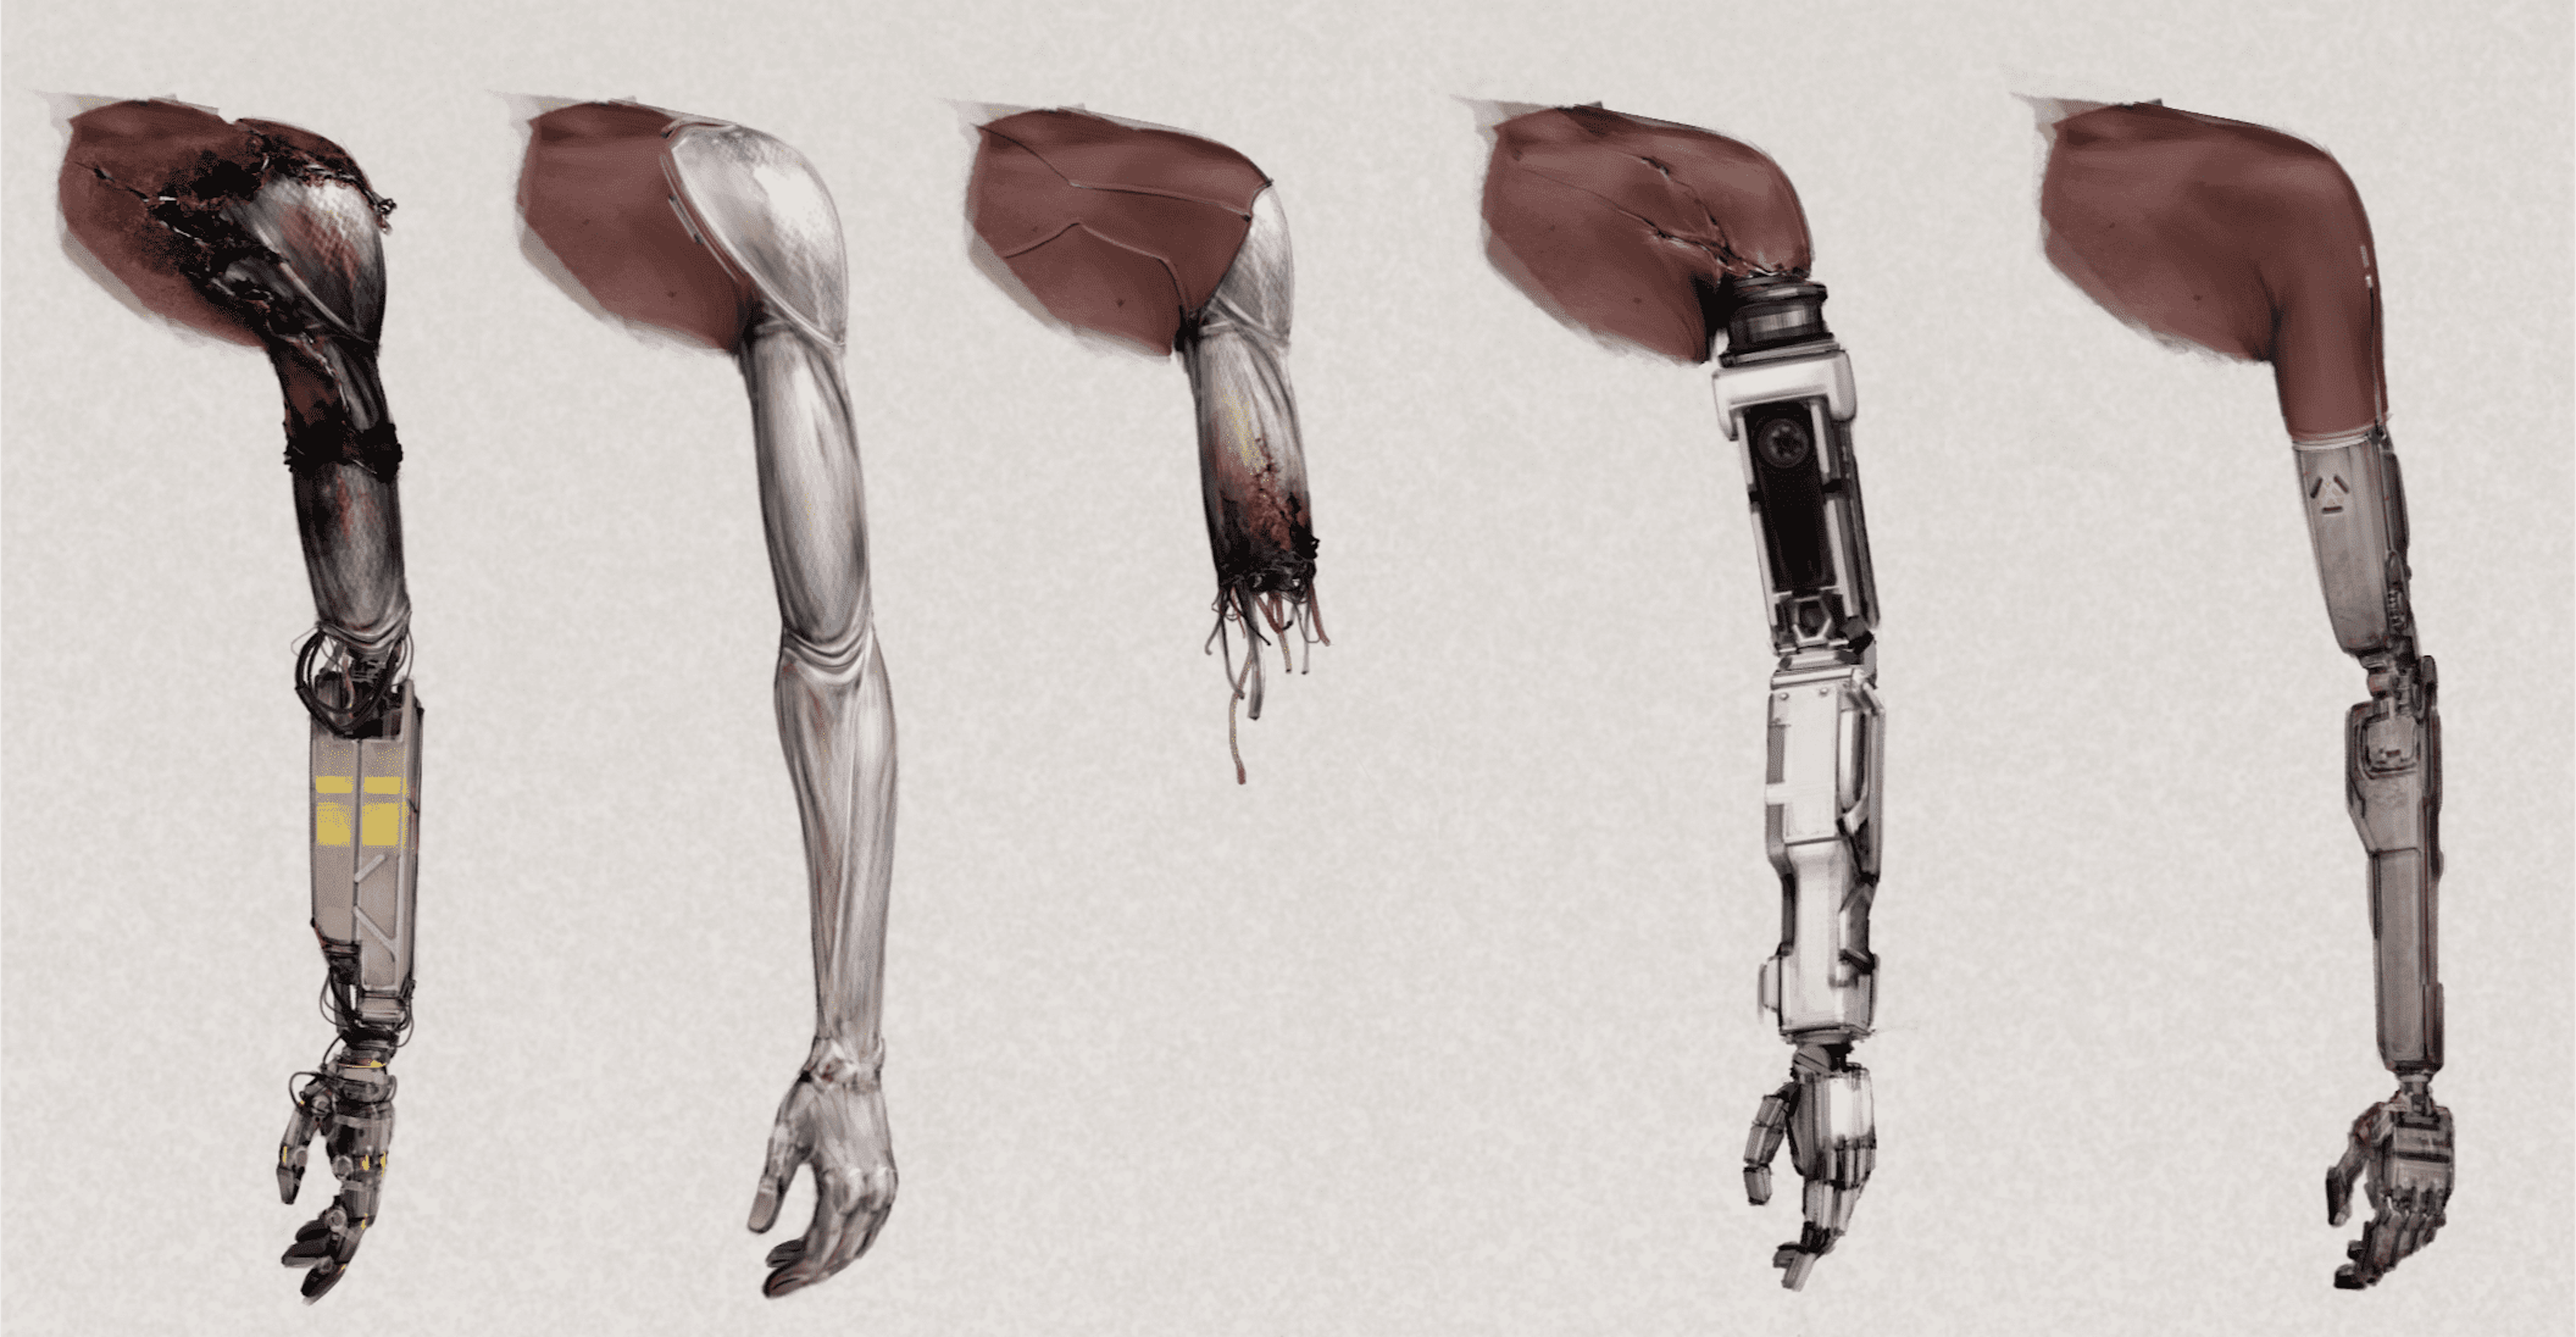 Concept art of sci fi prosthetic arms